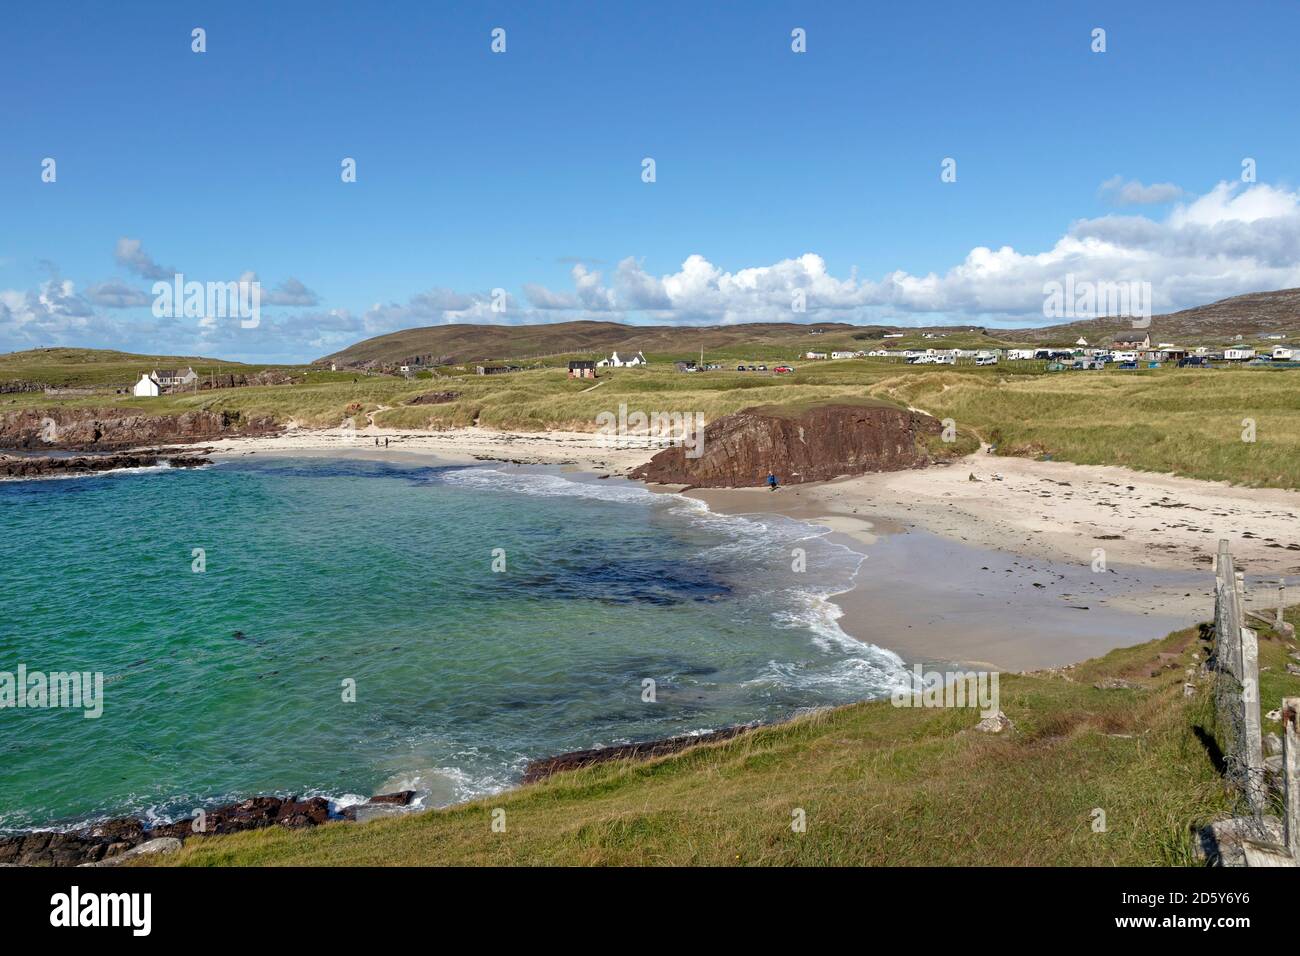 Clachtoll Beach, an Increasingly Popular Tourist Destination on the North Coast 500 Tourist Route, Clachtoll, Assynt, NW Highlands, Scotland, UK Stock Photo